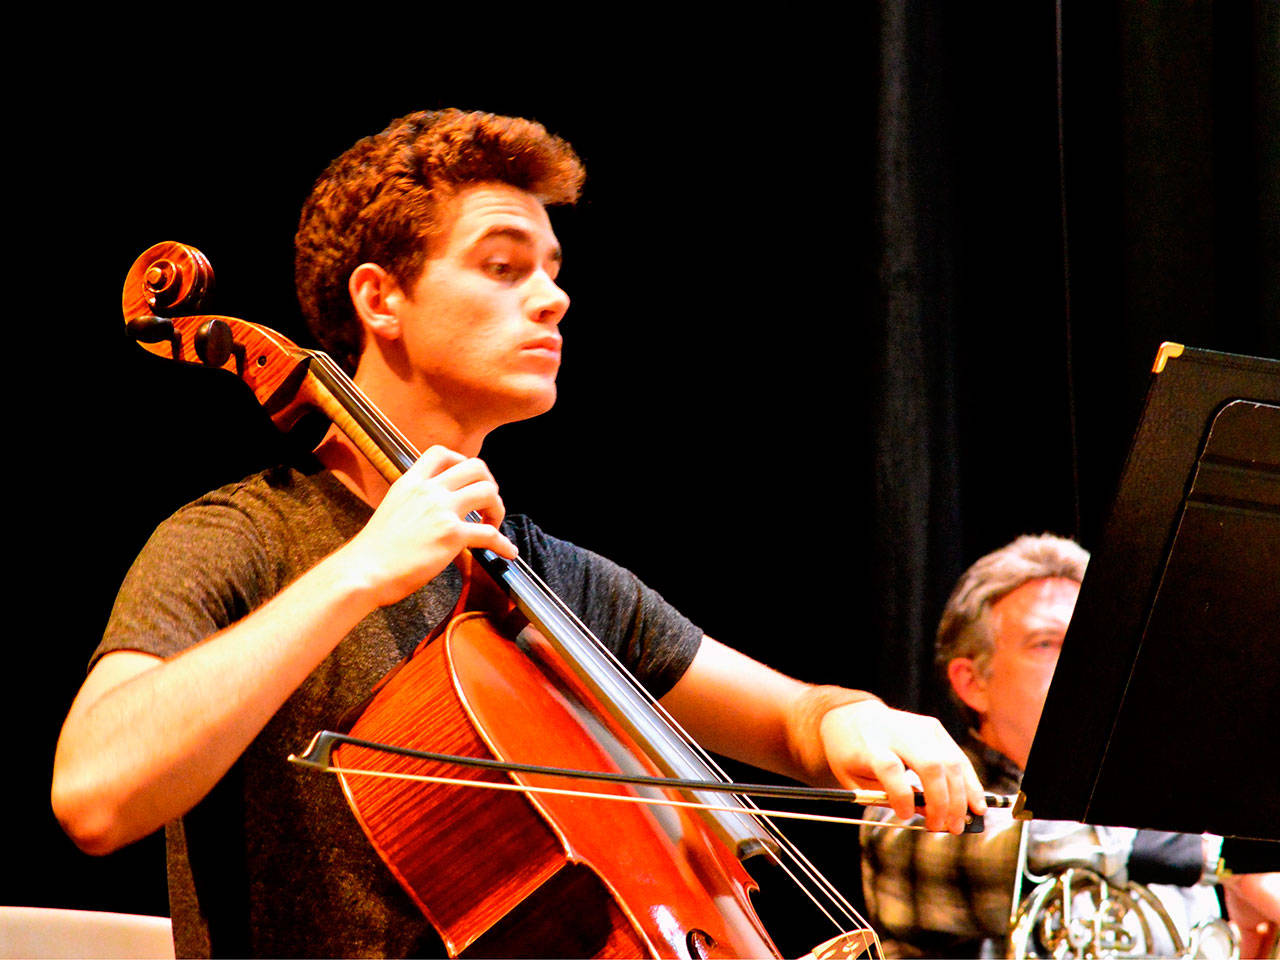 Karson Nicpon, Port Angeles High School student and cellist, competes in the 33rd annual Nico Snel Young Artist Competition this Saturday. (Diane Urbani de la Paz/for Peninsula Daily News)